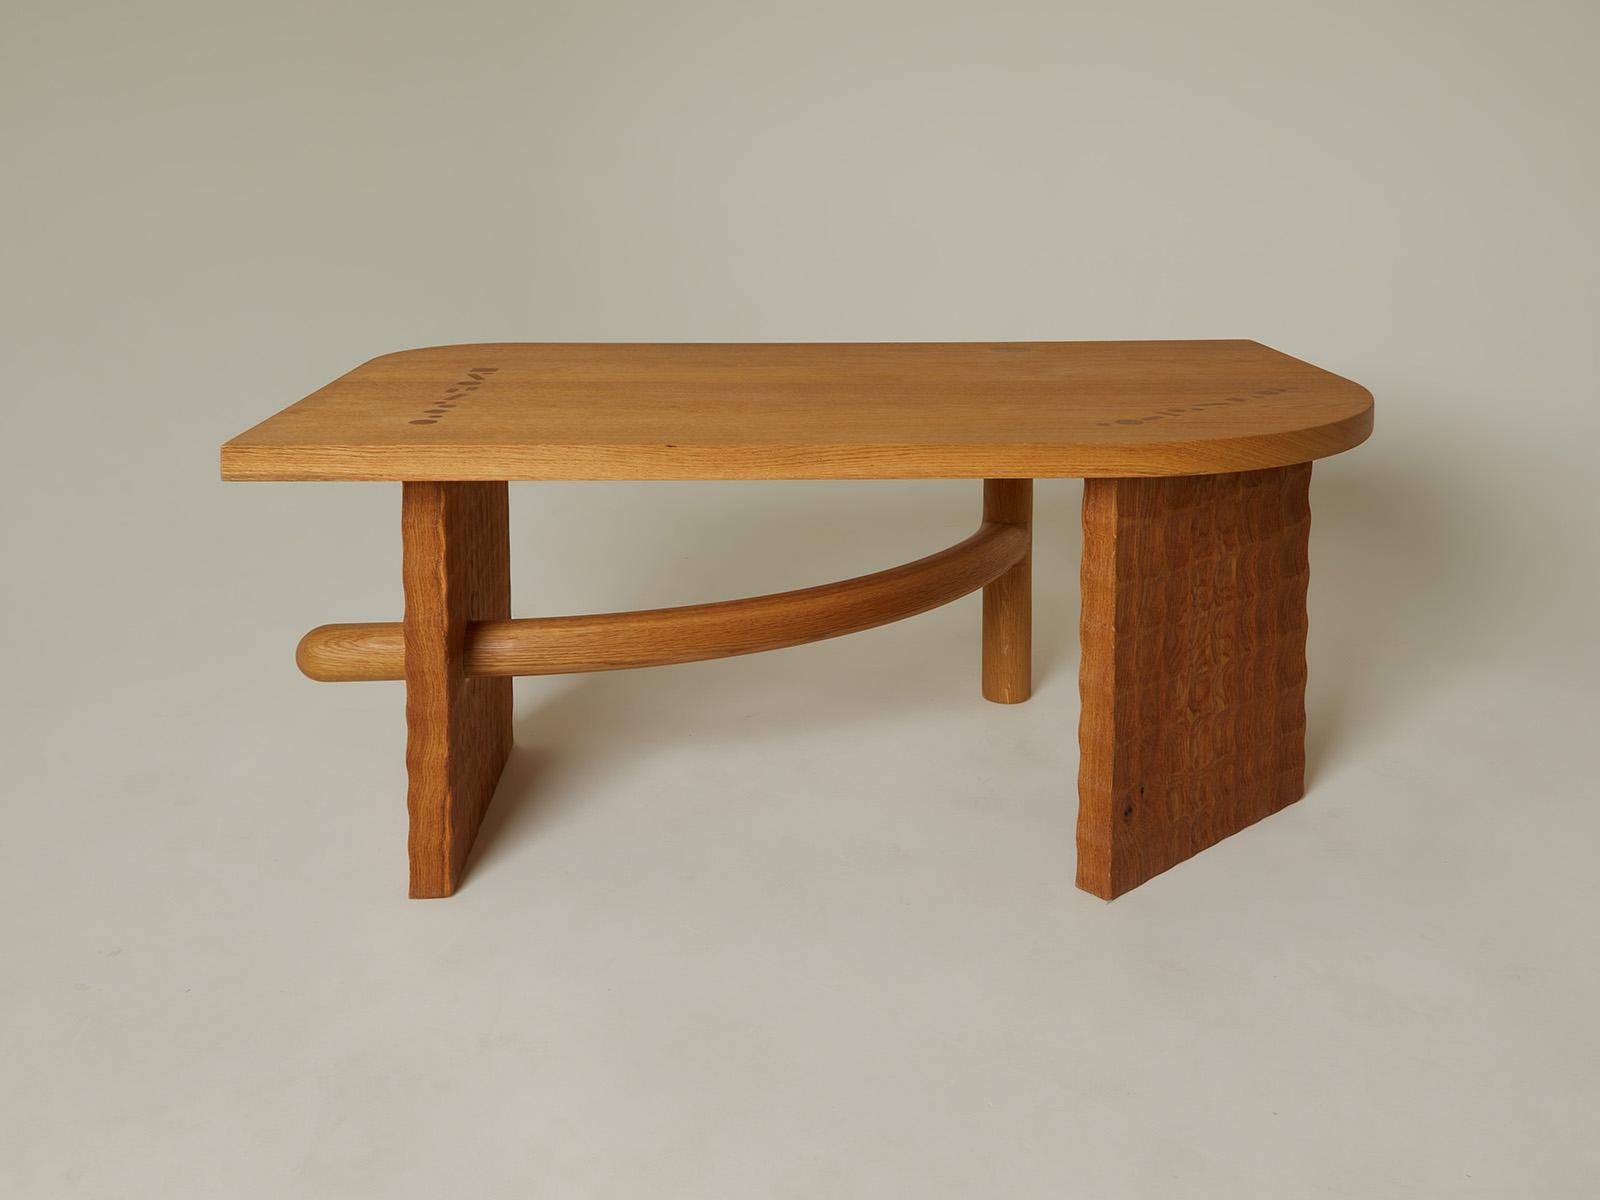 The Object System Series by Nathaniel Wojtalik takes industrialized forms and distills them through a lens of traditional craft. 

The base of the Sabbagh Billot table is attached by a series of intricately hand cut tenons that pass through the top,